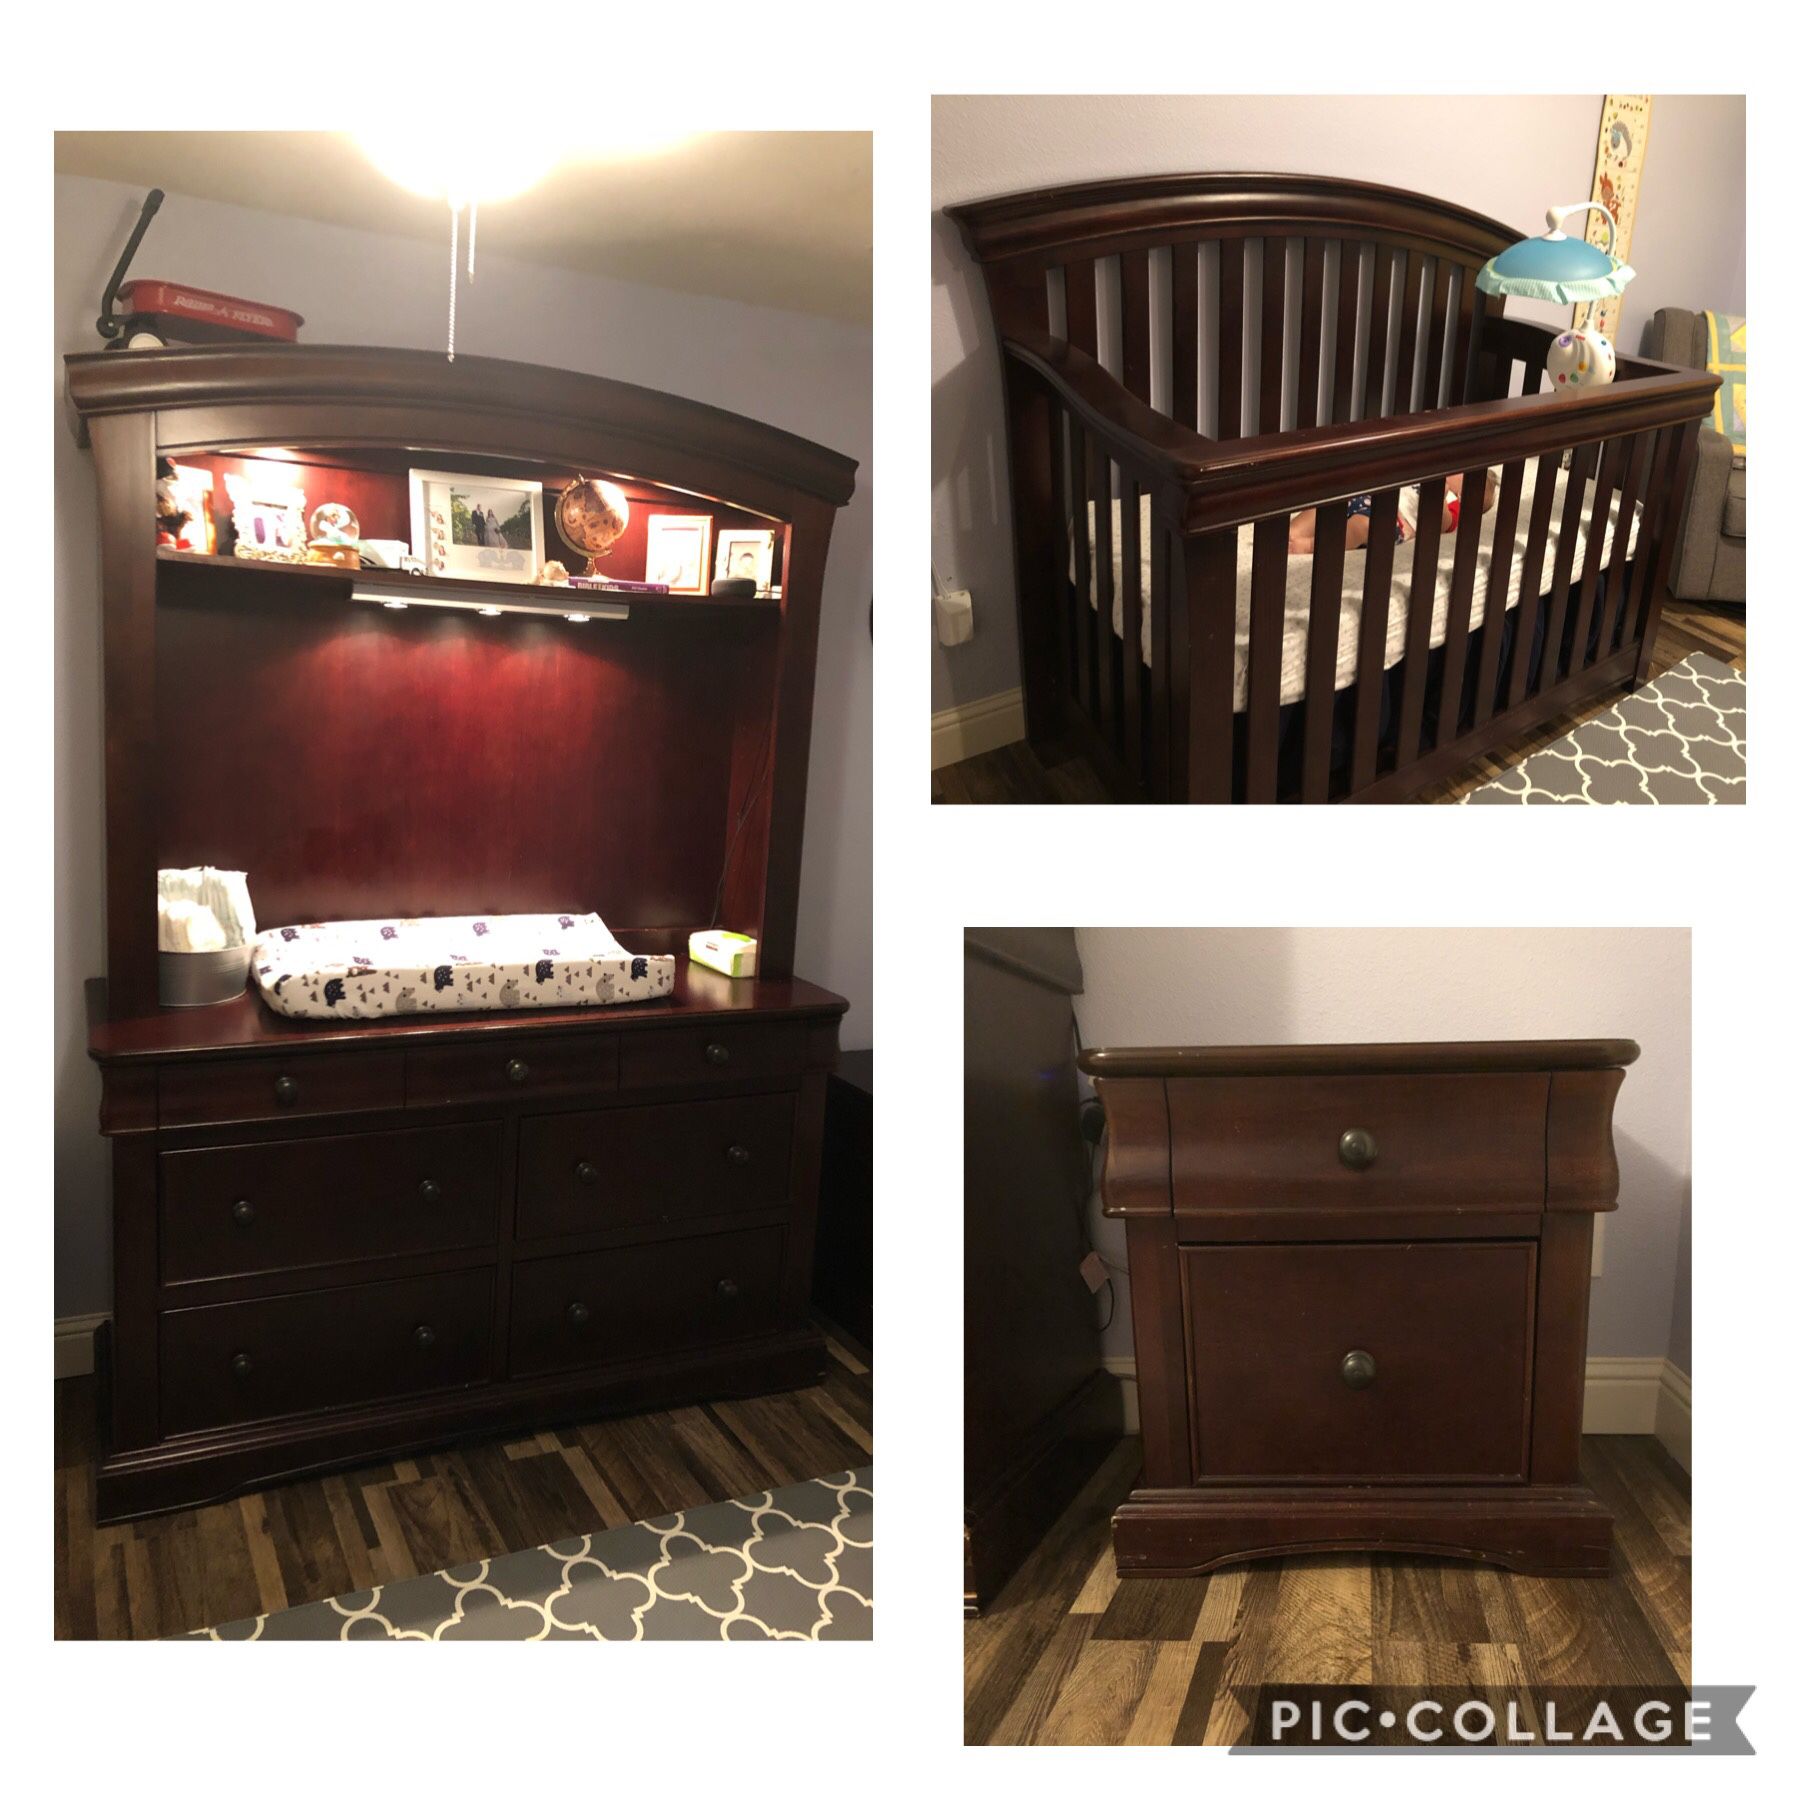 nursery furniture: crib/toddler bed, changing table, dresser, hutch, nightstand